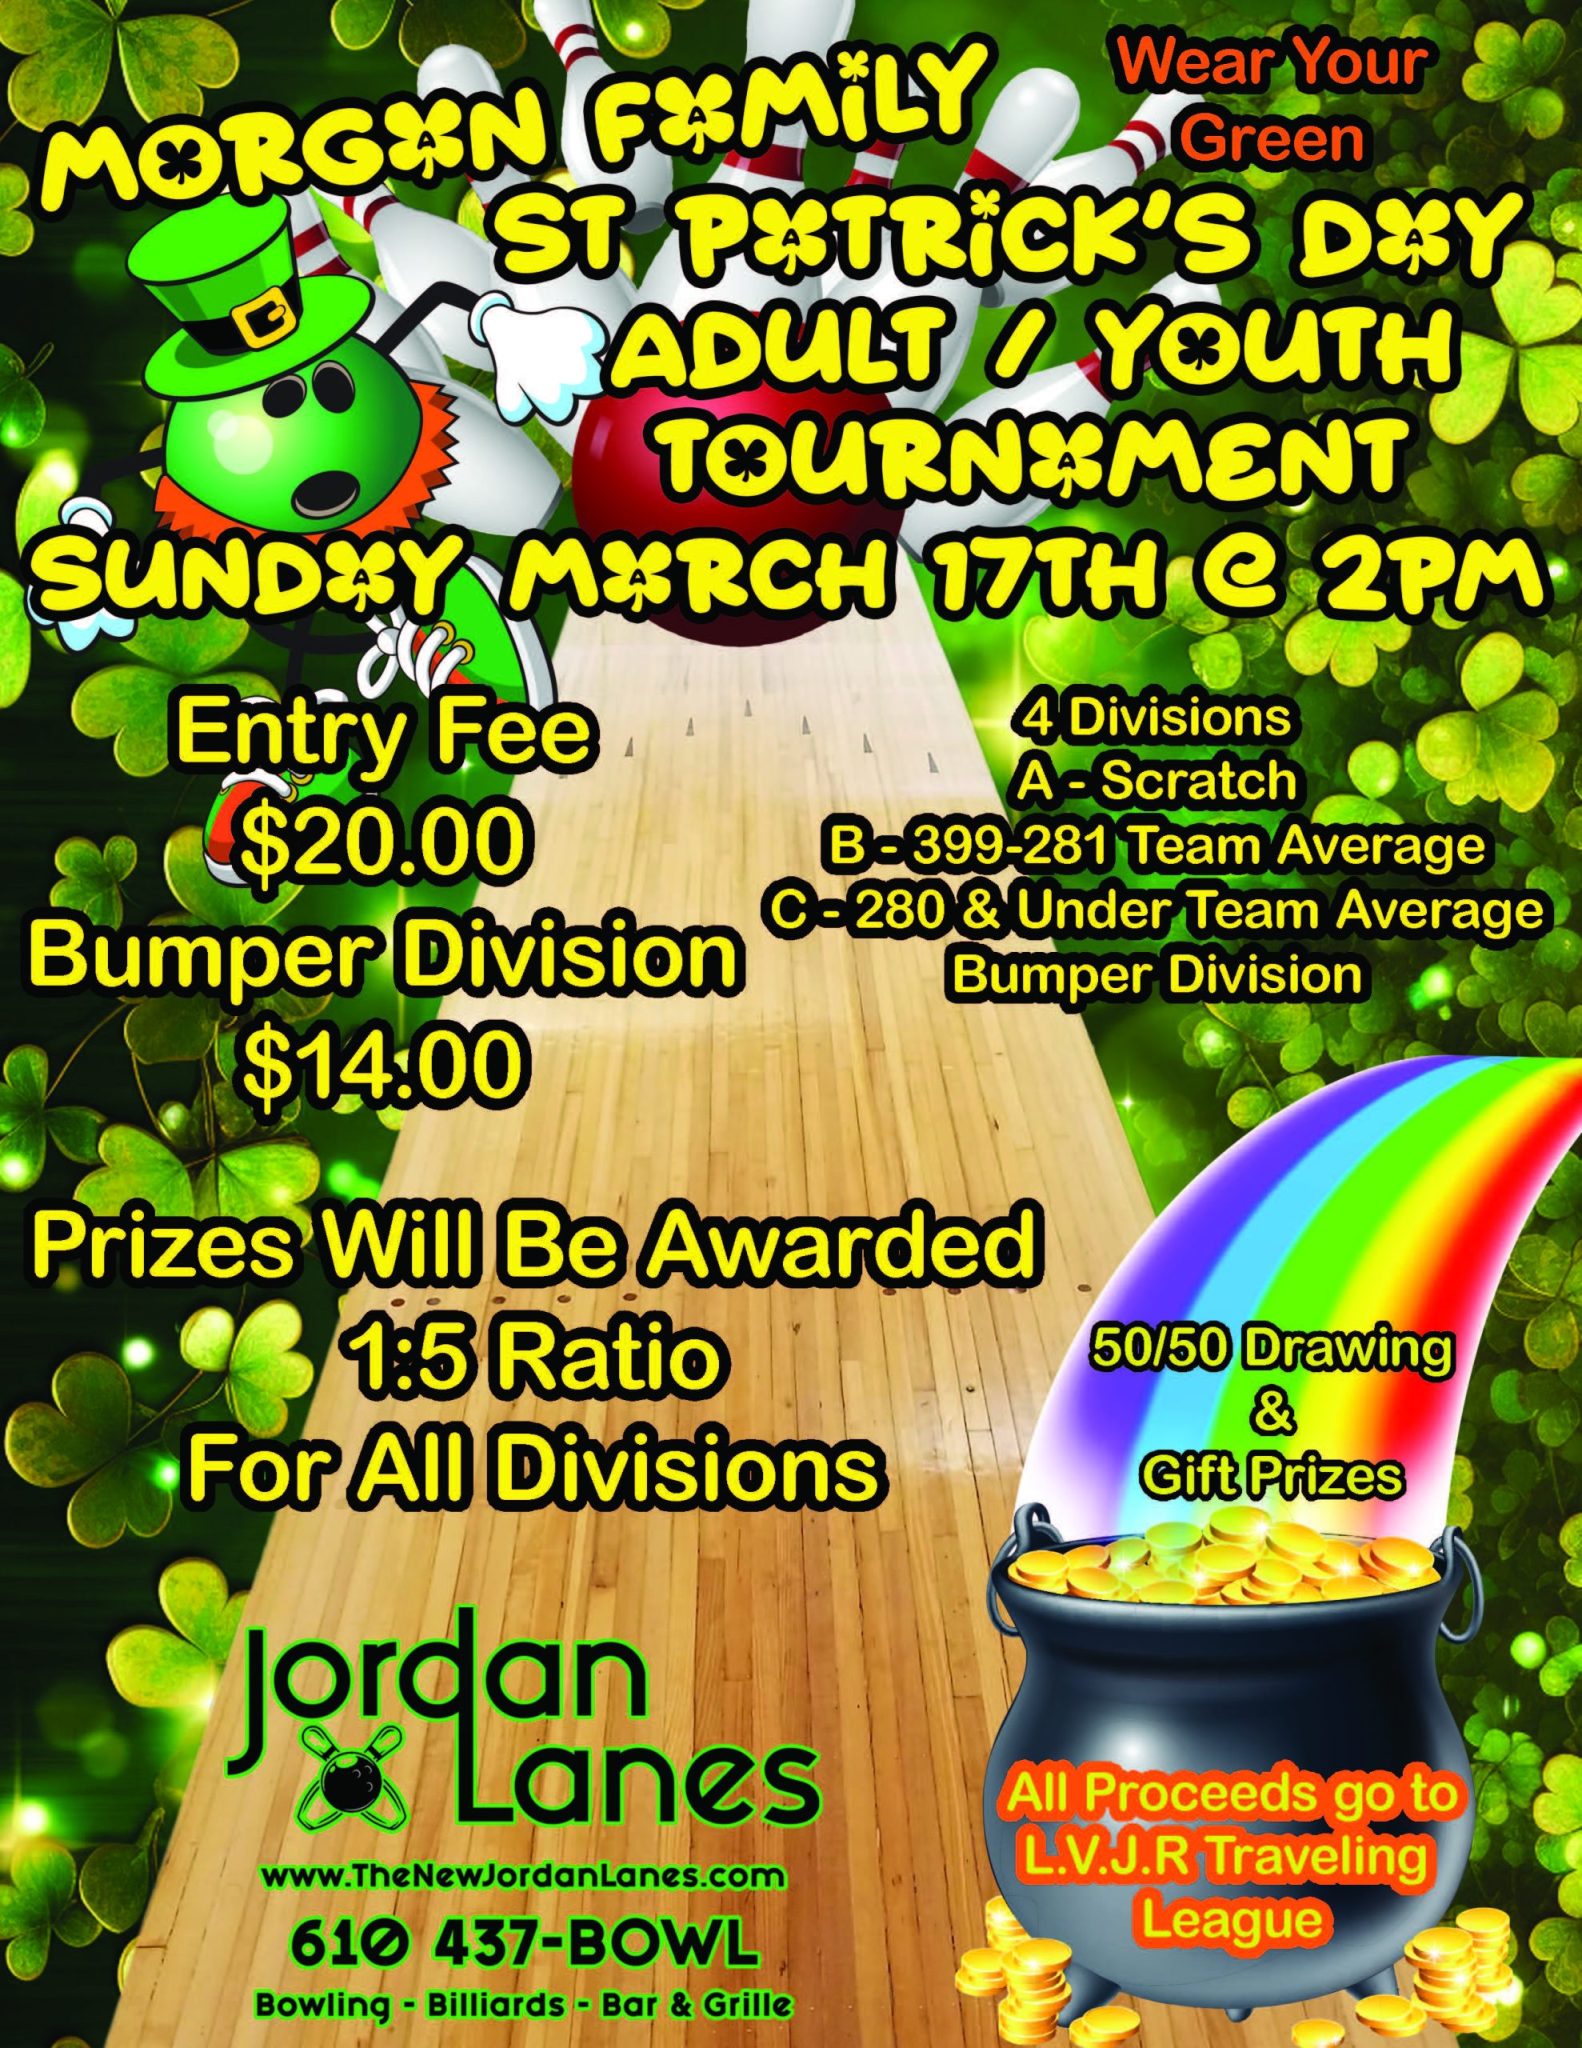 Morgan Family Adult / Youth Tournament 22